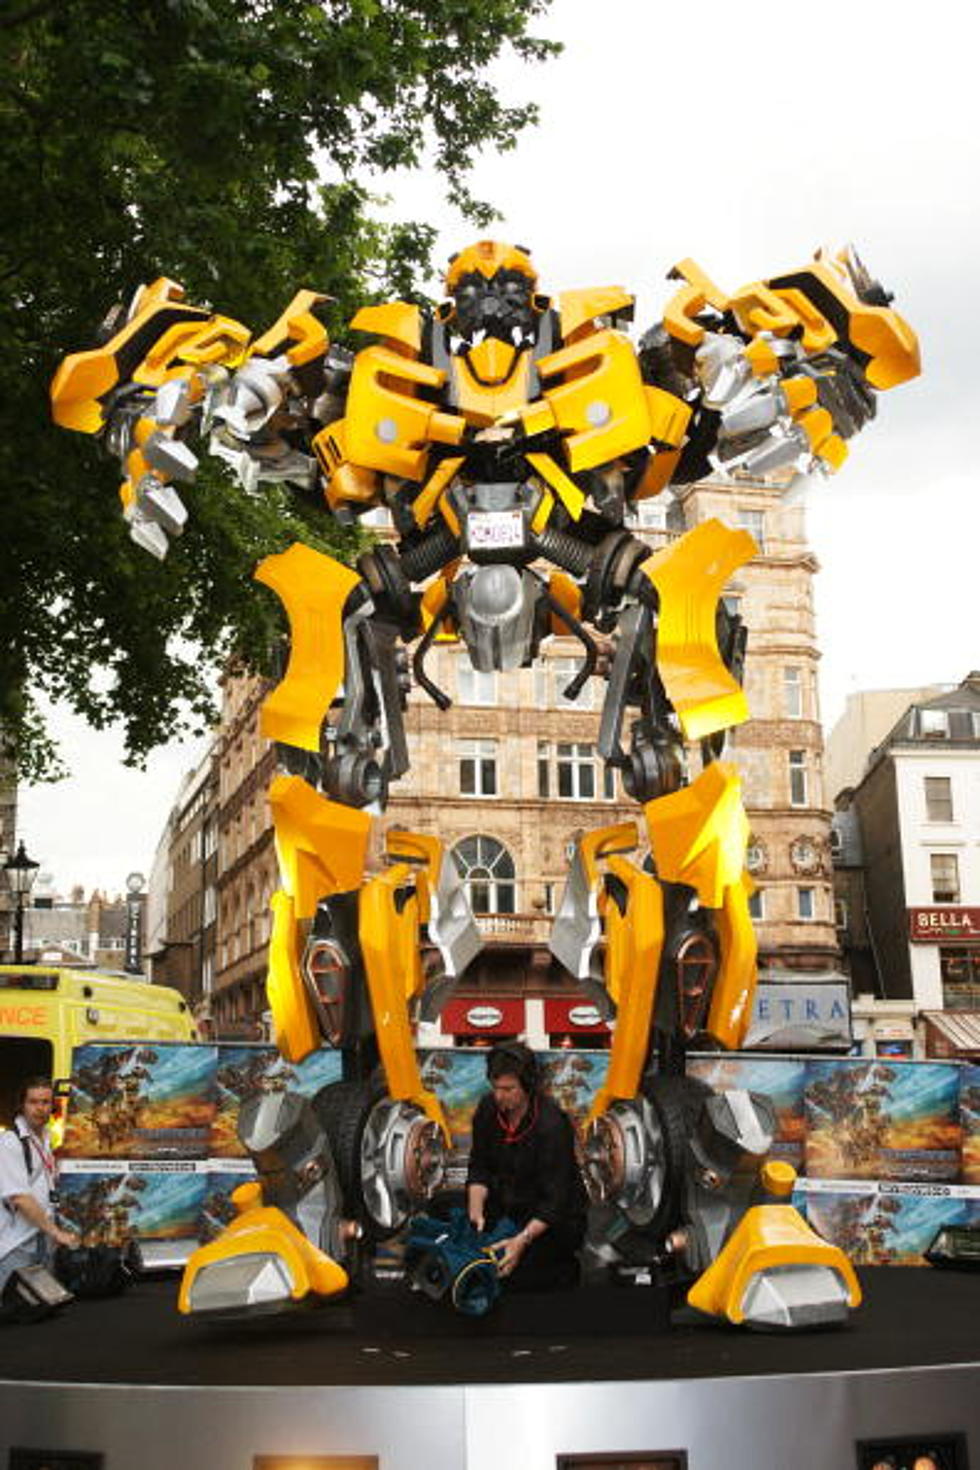 Check Out The Human Transformer! [Video]